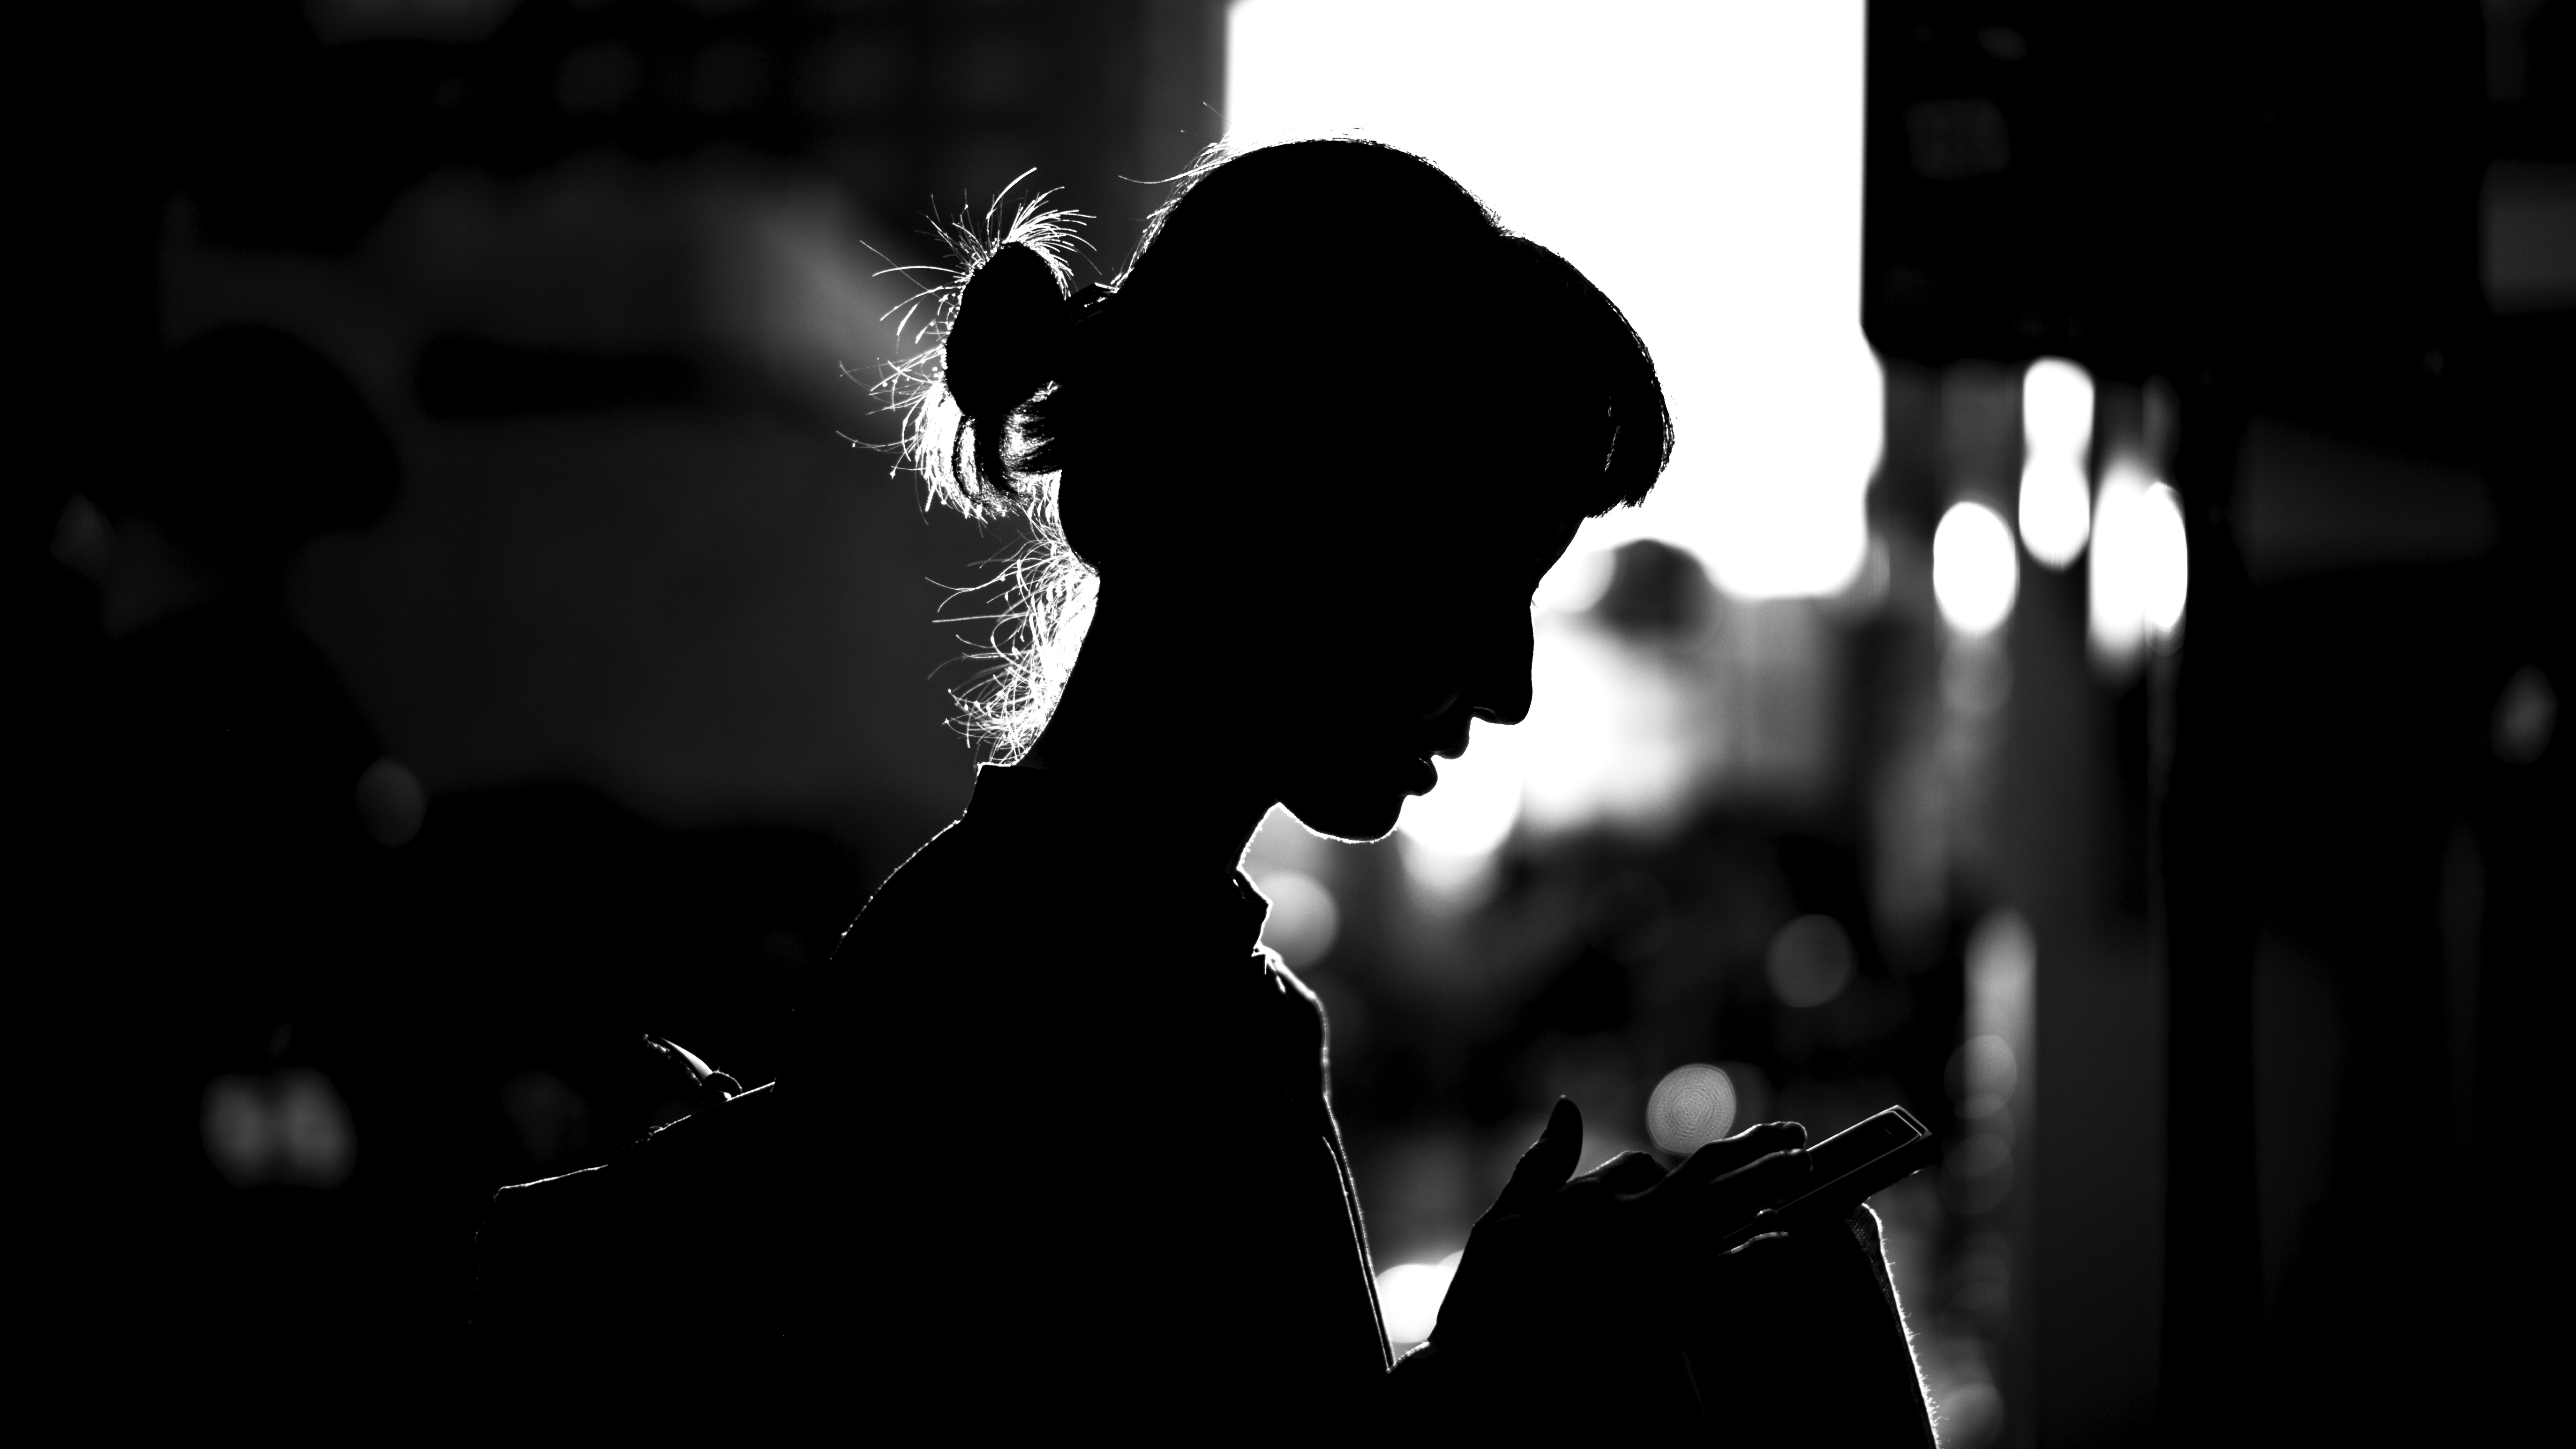 A young woman in silhouette with a messy bun and sporting a backpack stands looking down at the device she holds. The buildings in the background are blurred.